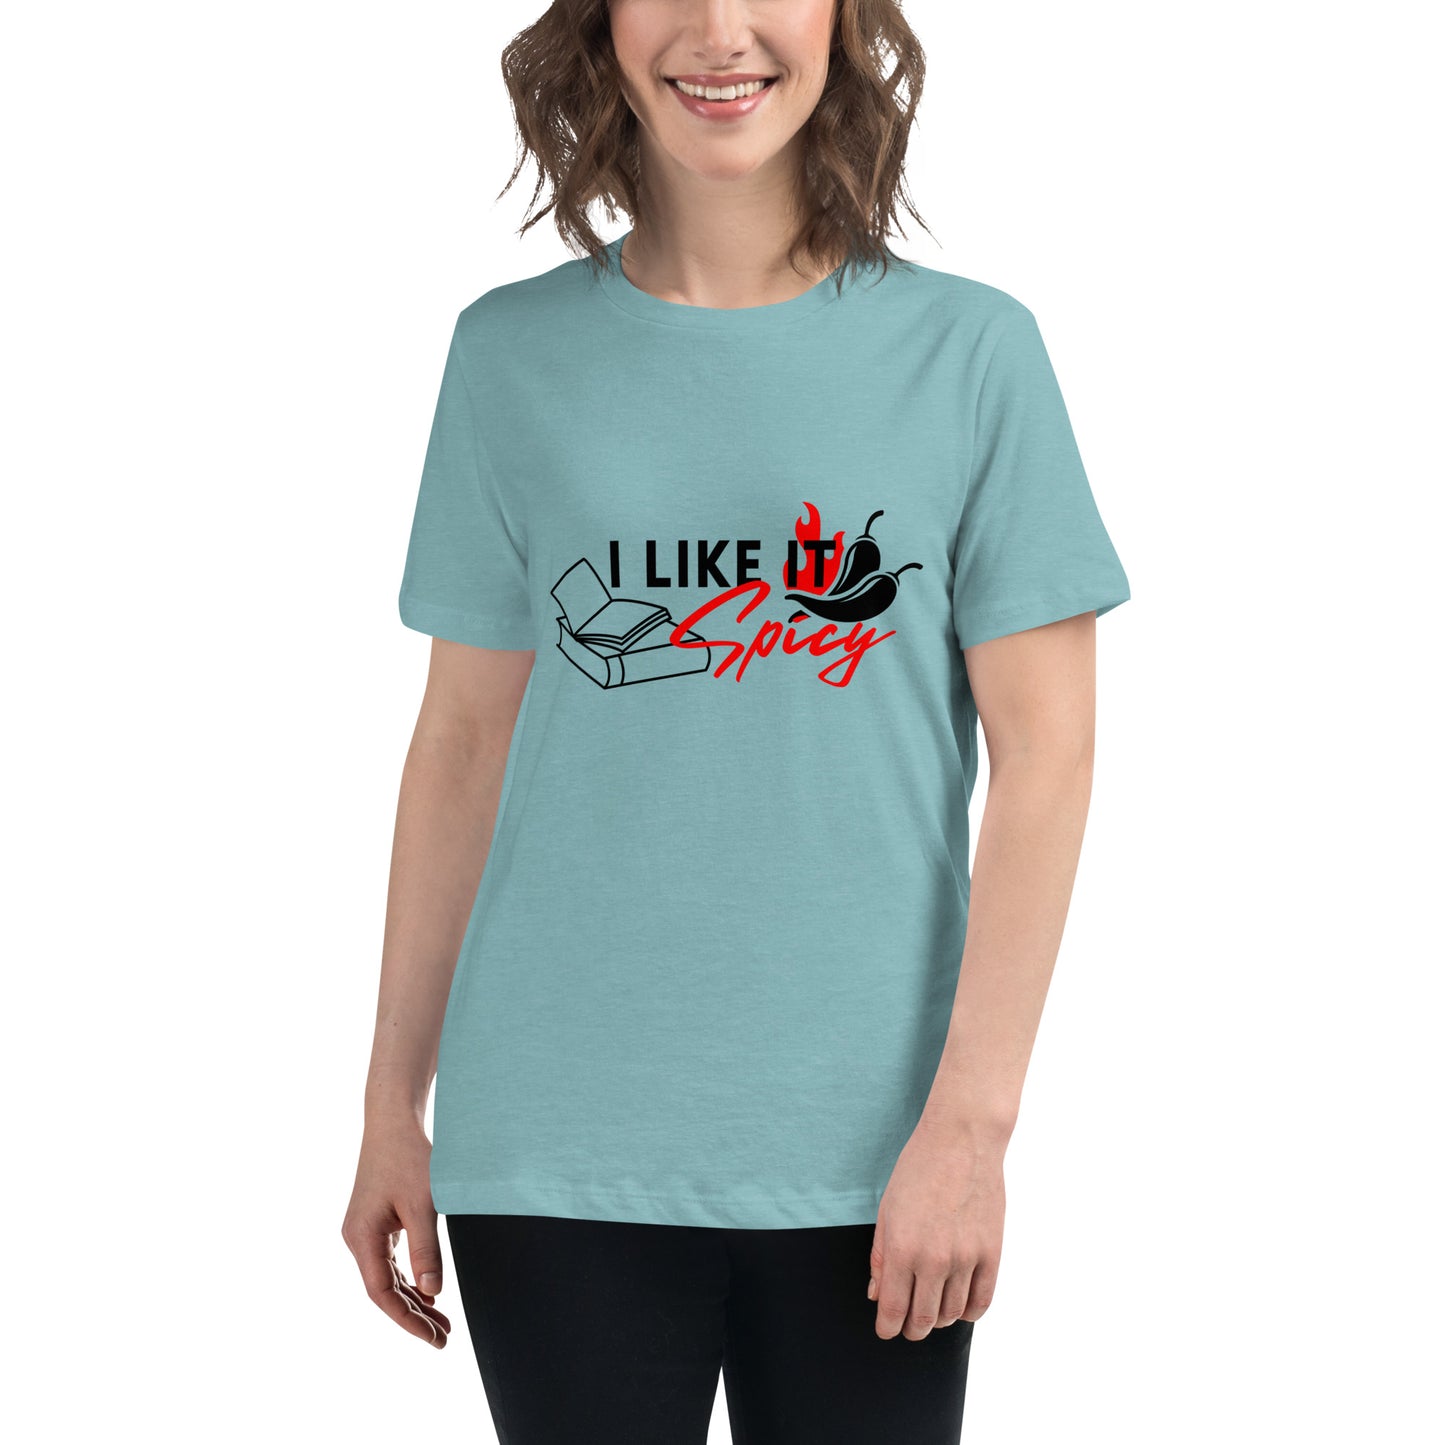 Spicy Women's Relaxed T-Shirt